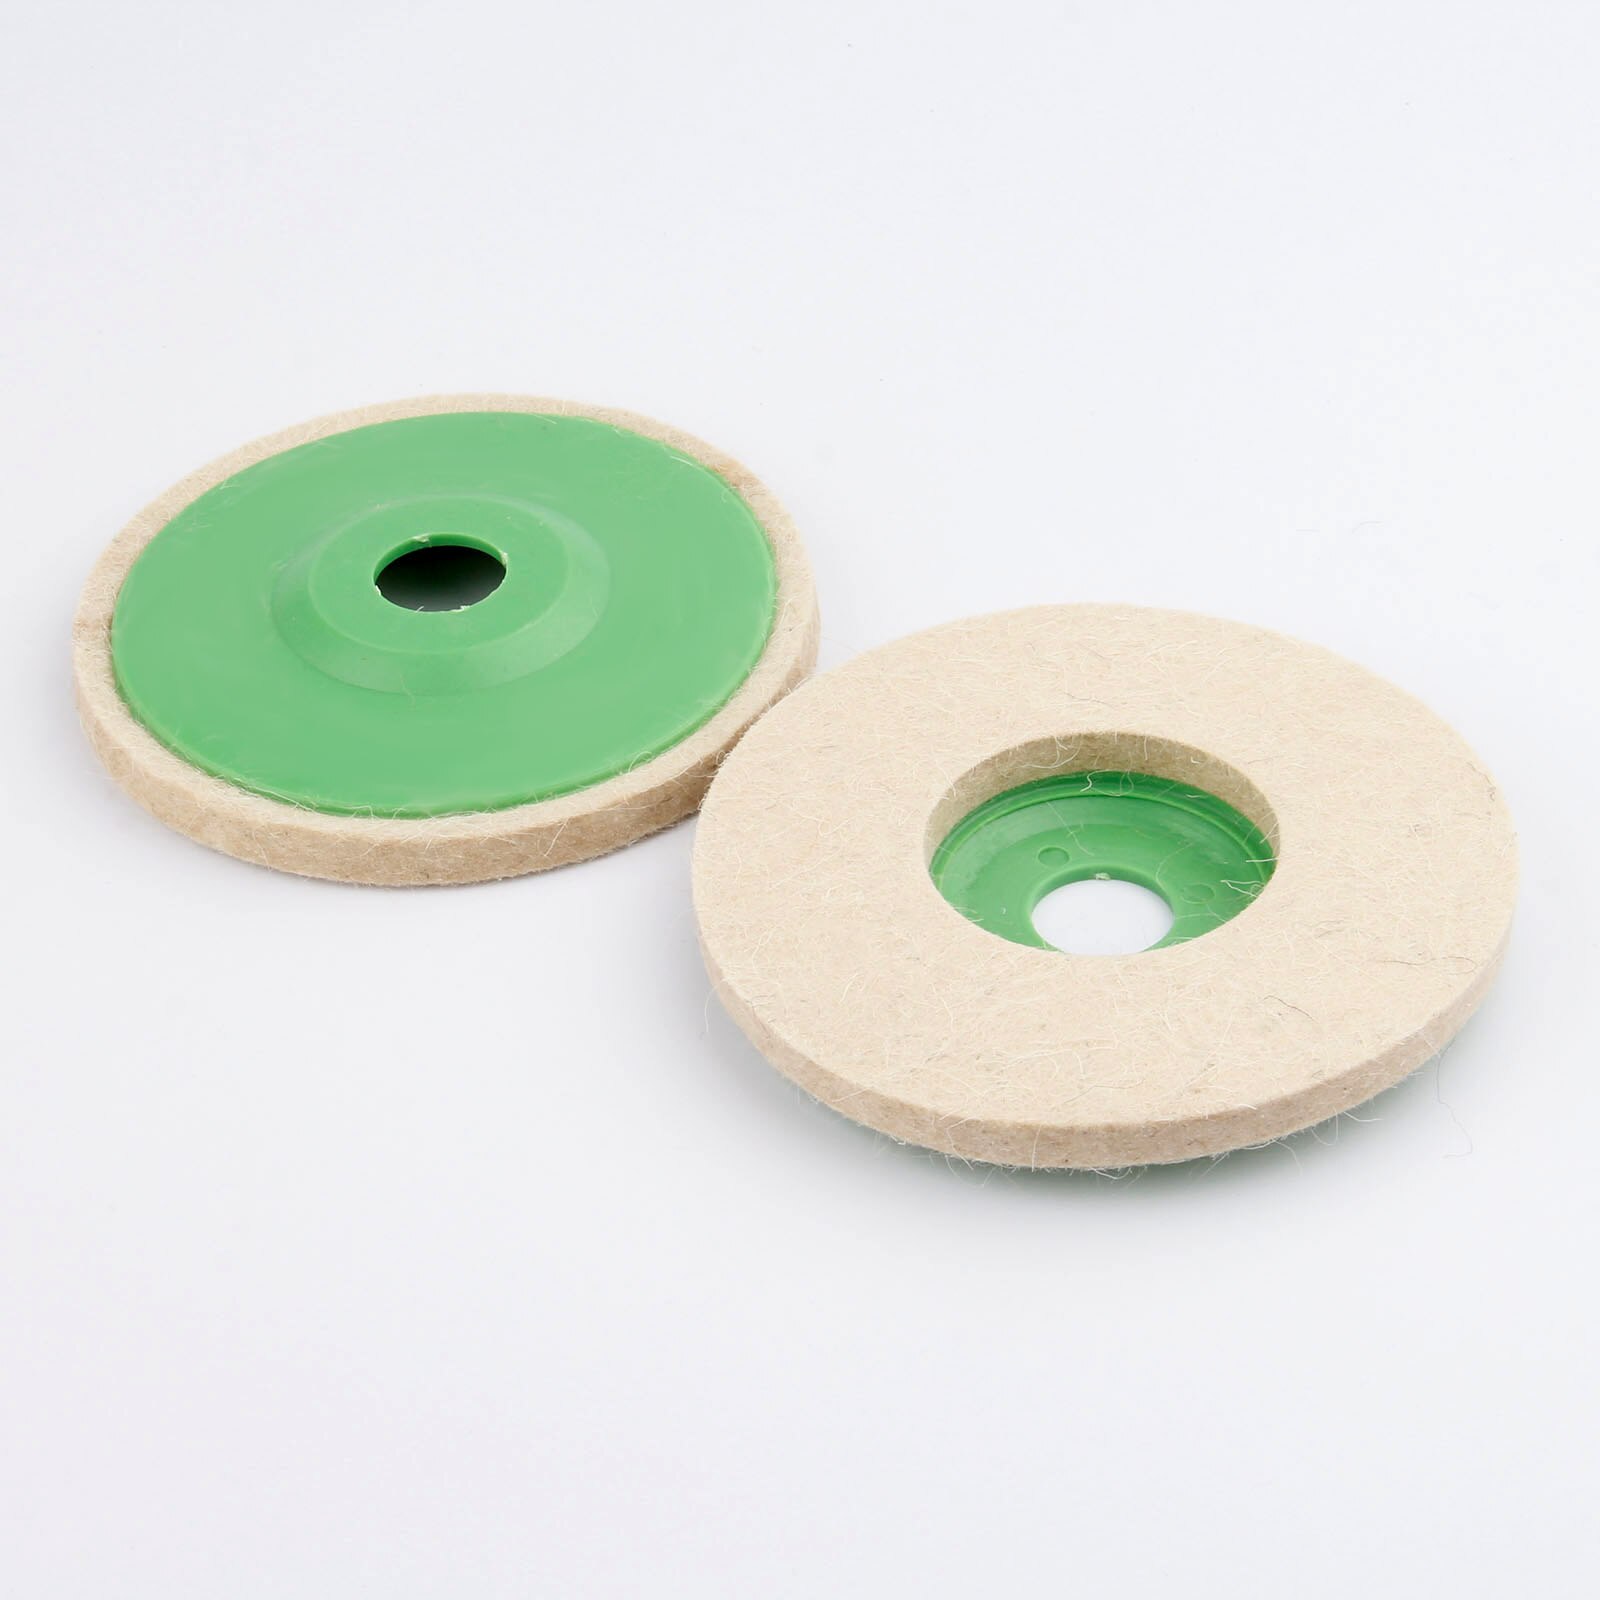 5in 125mm Wool Felt Grinding Wheel Pad Polishing Disc Buffer Polisher Tools for furniture and wood marble